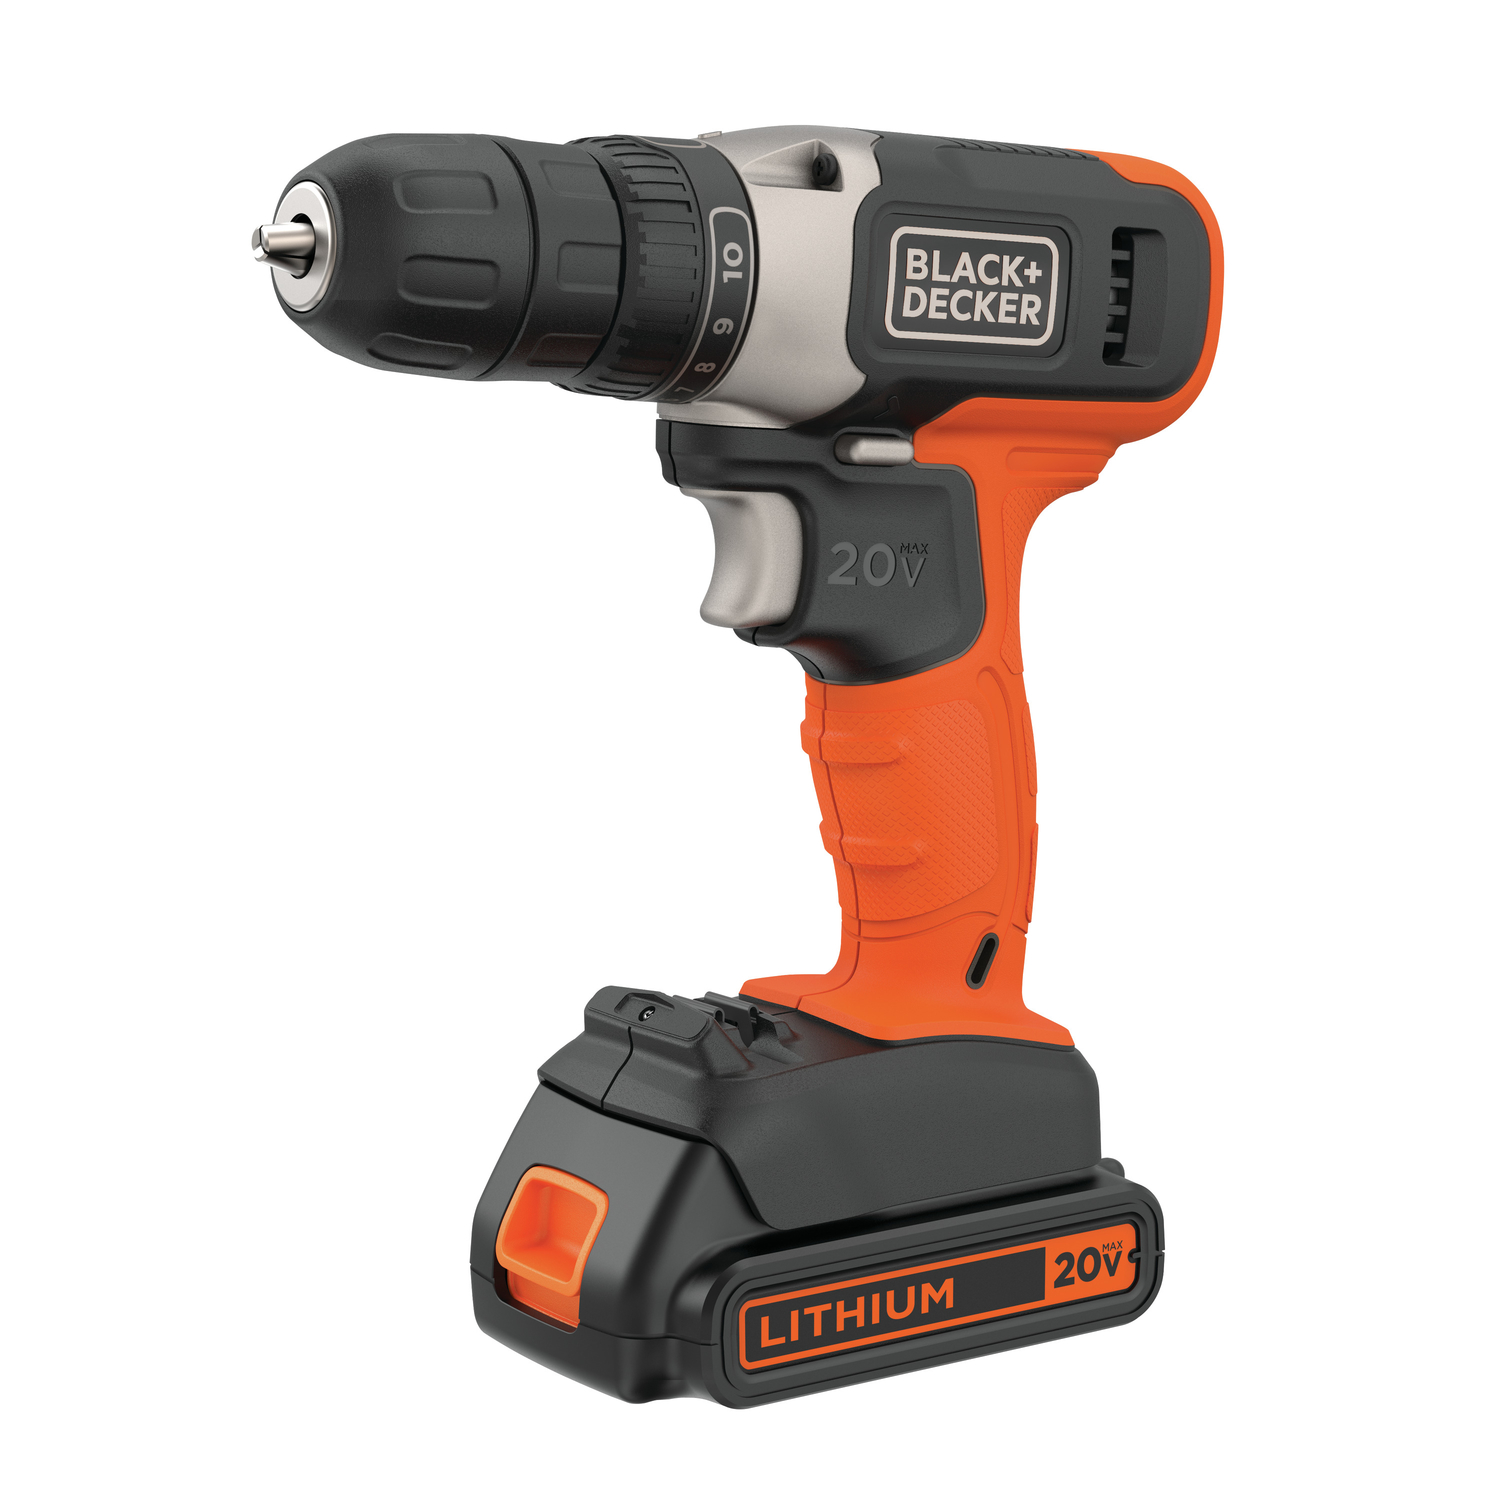 BEACH PAWN - Black and decker corded drill 4.5 amp 3/8